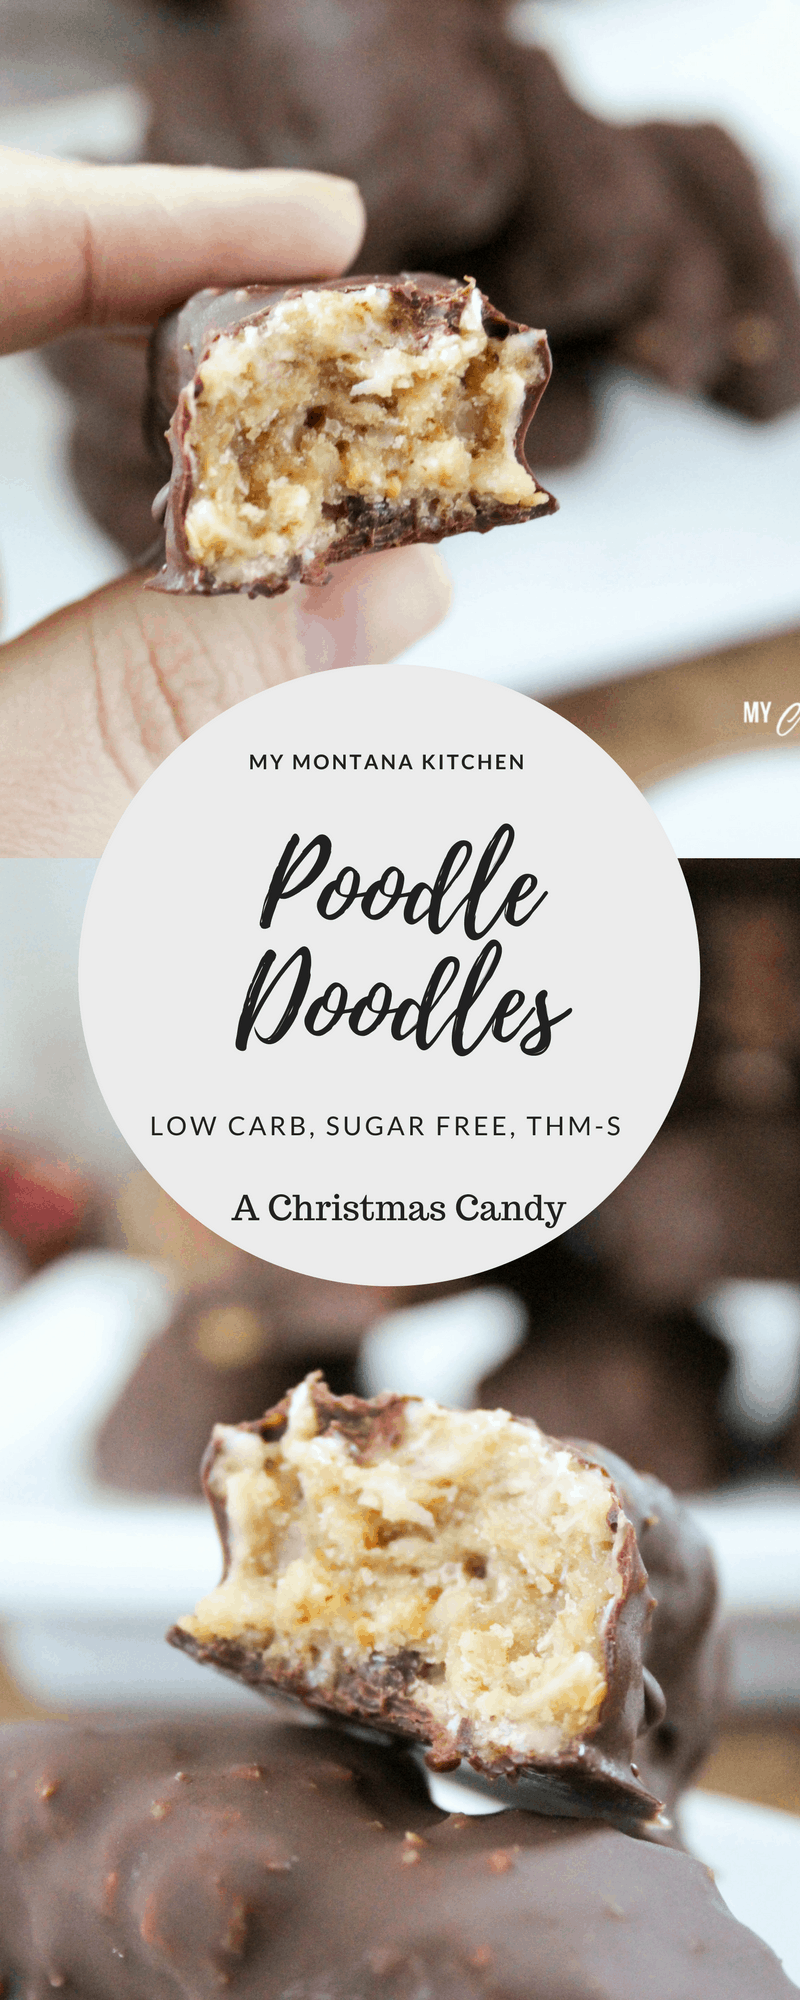 Low Carb Poodle Doodles (THM-S, Sugar Free) #trimhealthymama #thms #chocolate #peanutbutter #christmas #candy #lowcarb #sugarfree #glutenfree